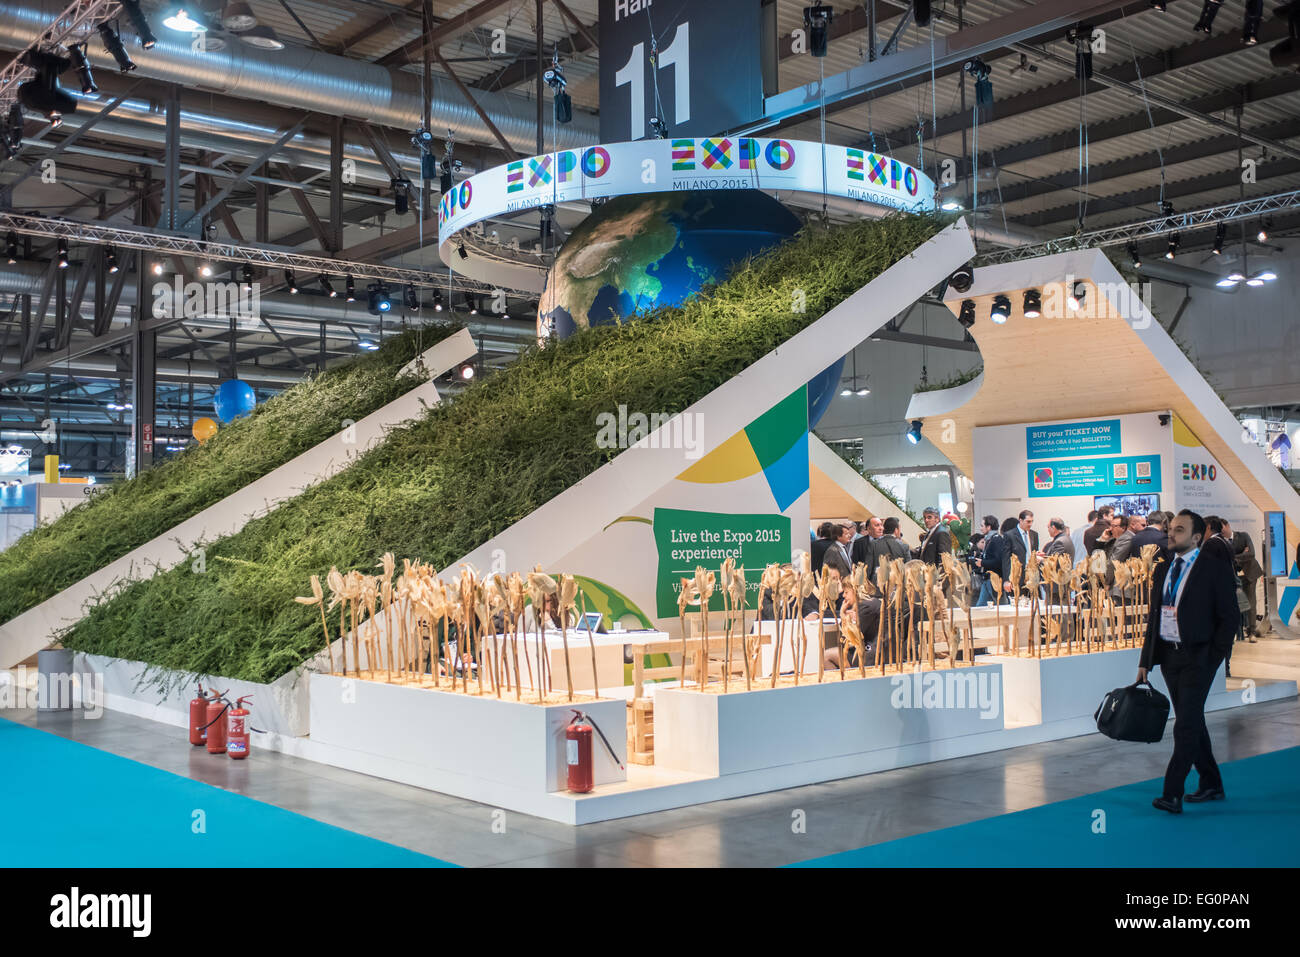 Expo Milan 2015 High Resolution Stock Photography and Images - Alamy